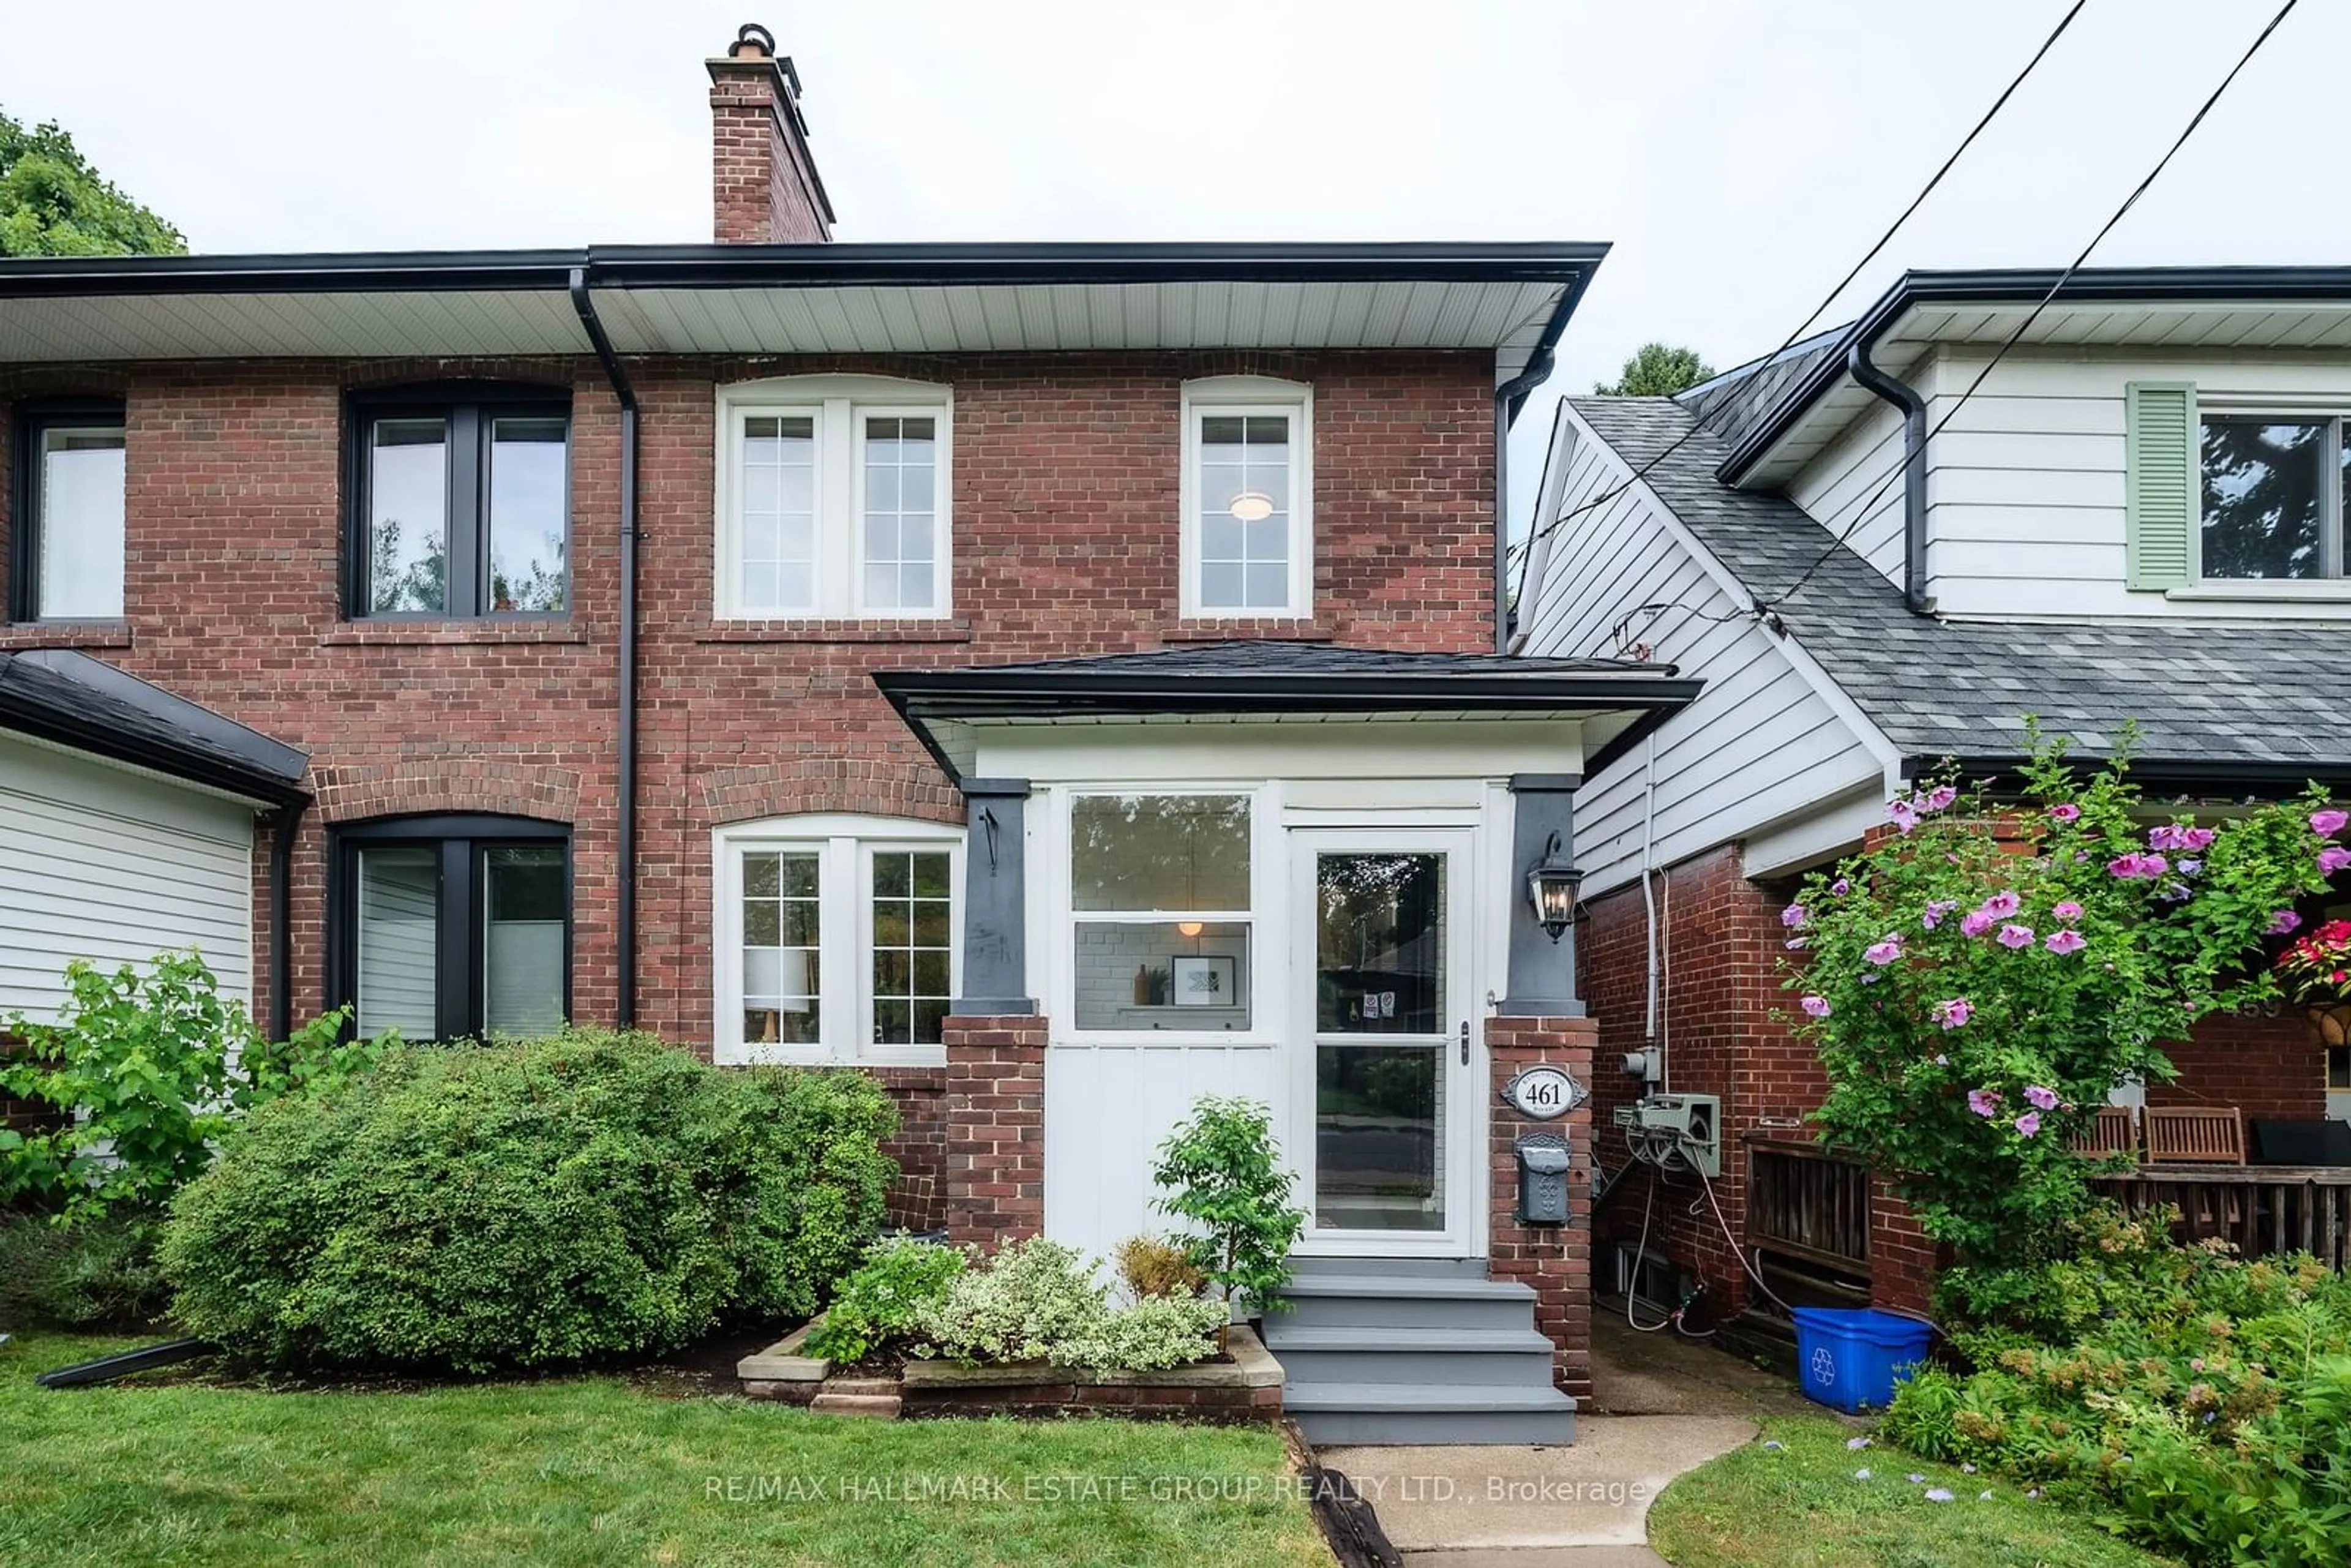 Home with brick exterior material for 461 Kingswood Rd, Toronto Ontario M4E 3P4